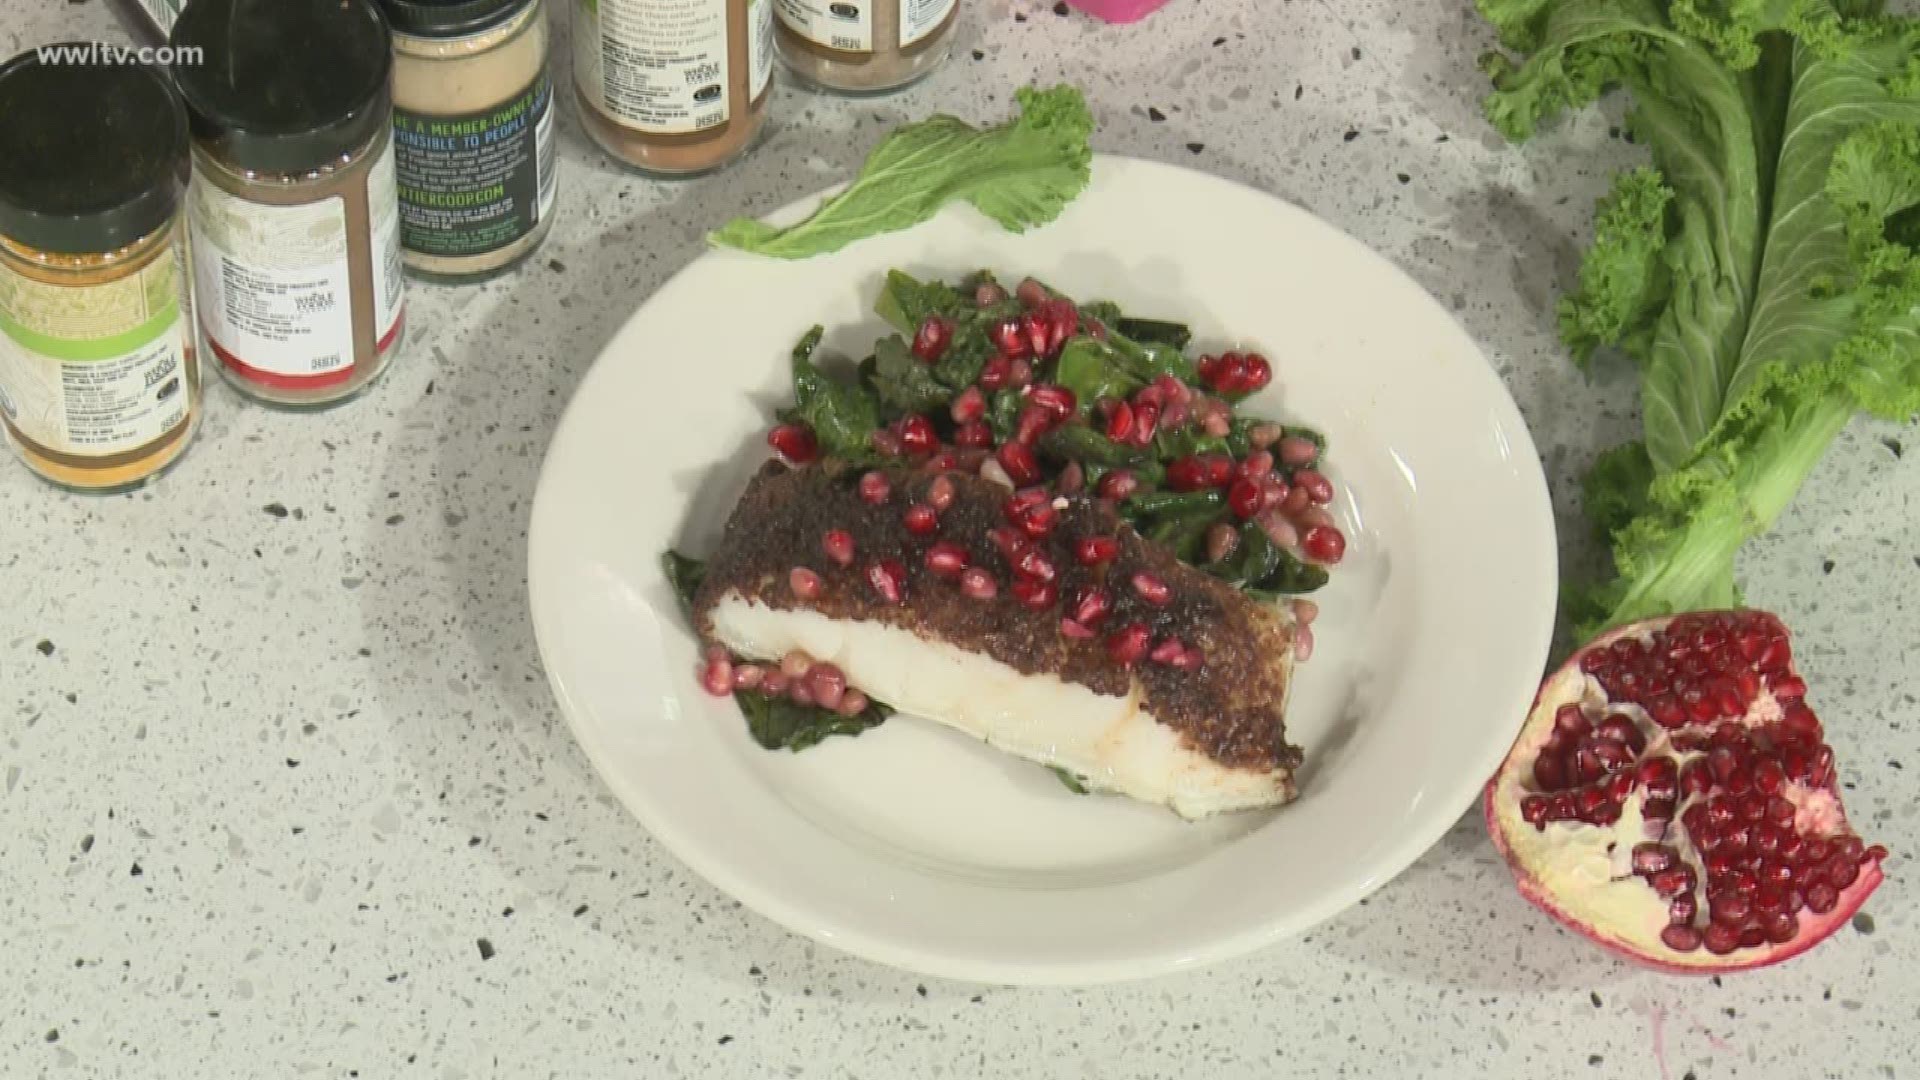 Chef Jordan Zucker is giving us a taste of her brand new cookbook that is available online now.